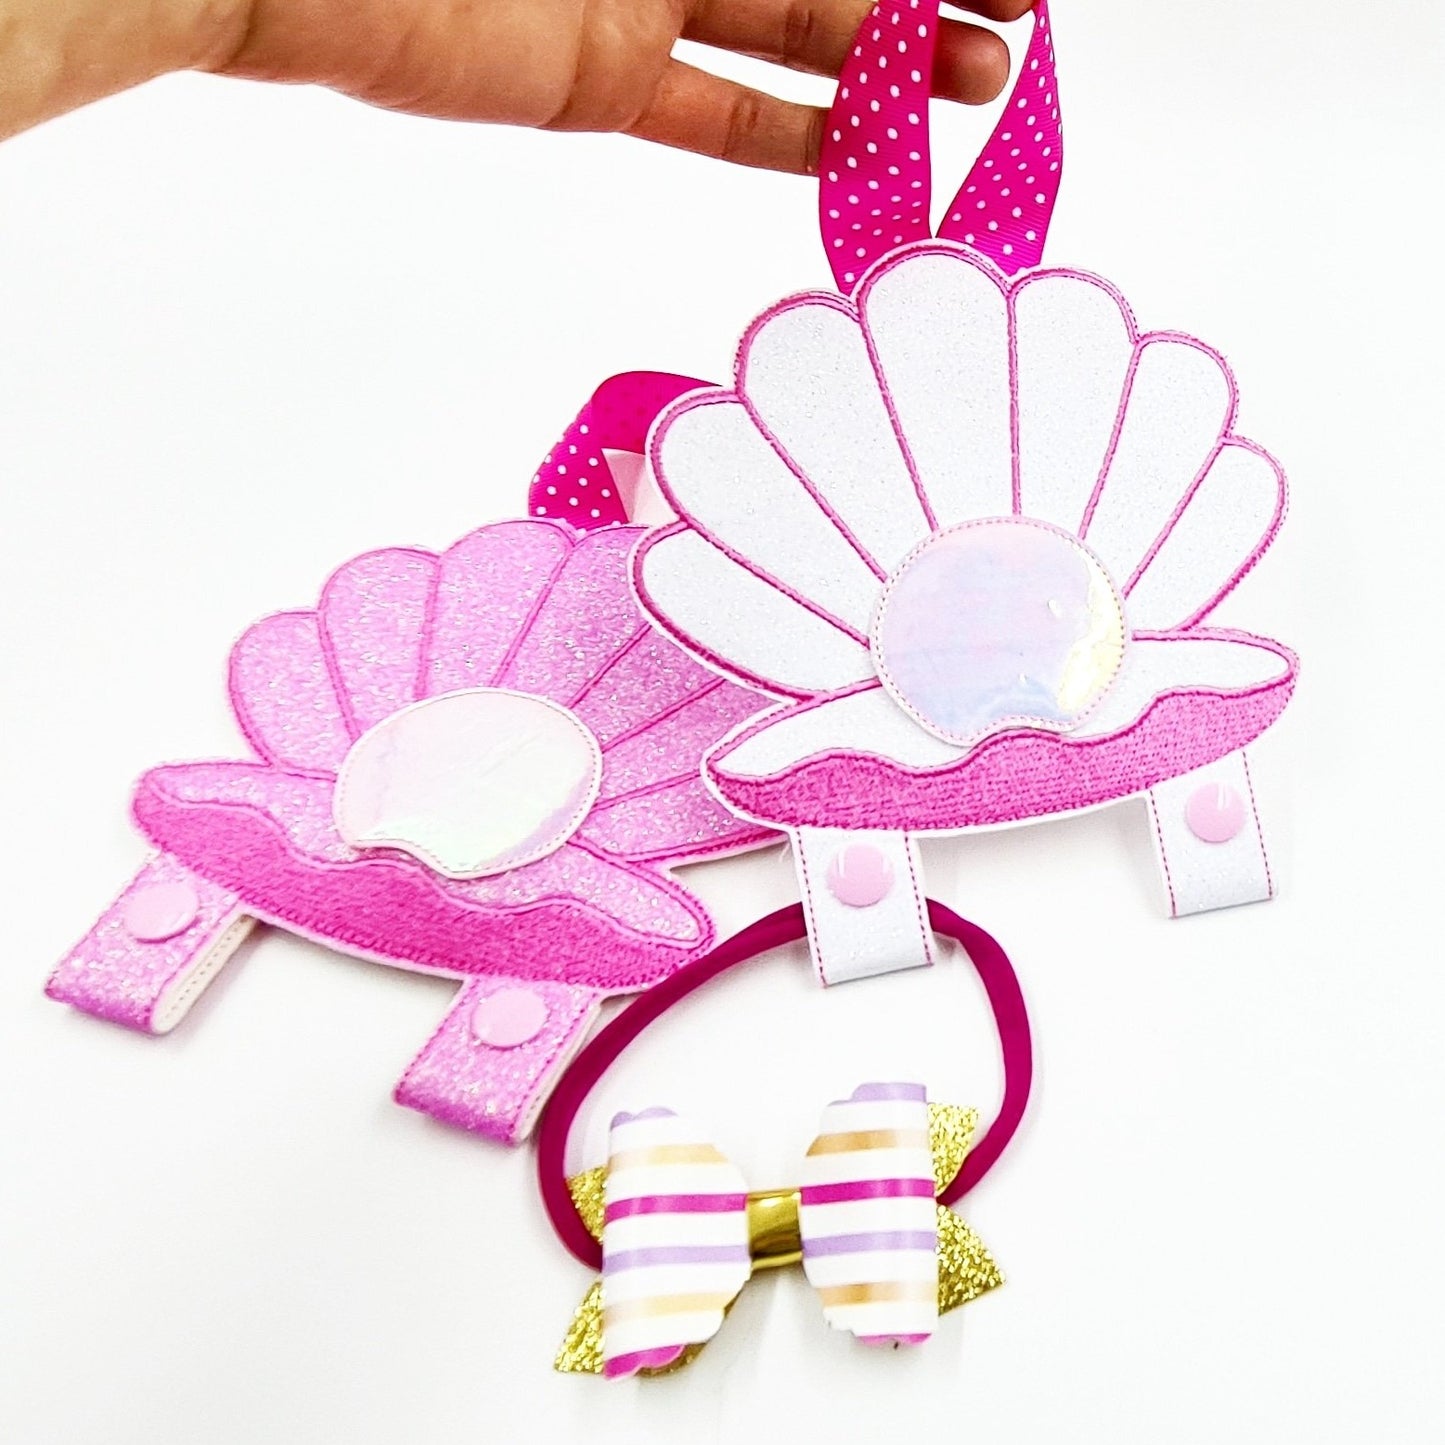 Clam Shell and Pearl Headband and Bow Holder